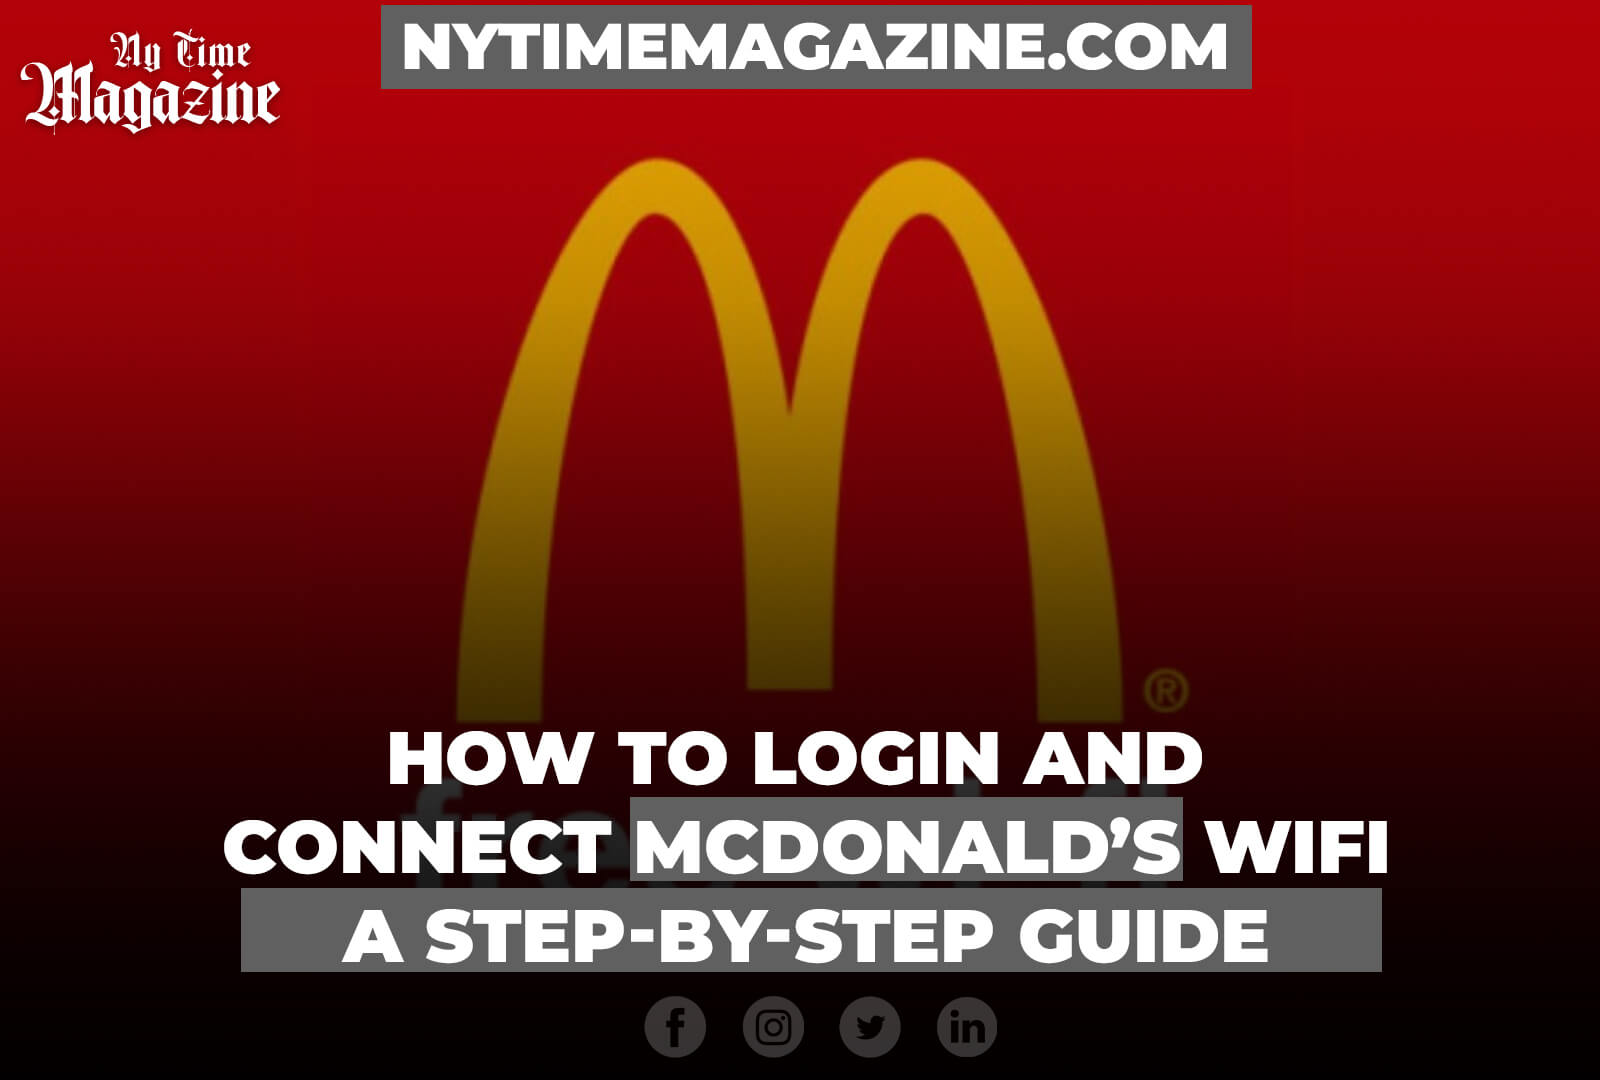 HOW TO LOGIN AND CONNECT MCDONALD’S WIFI | A STEP-BY-STEP GUIDE